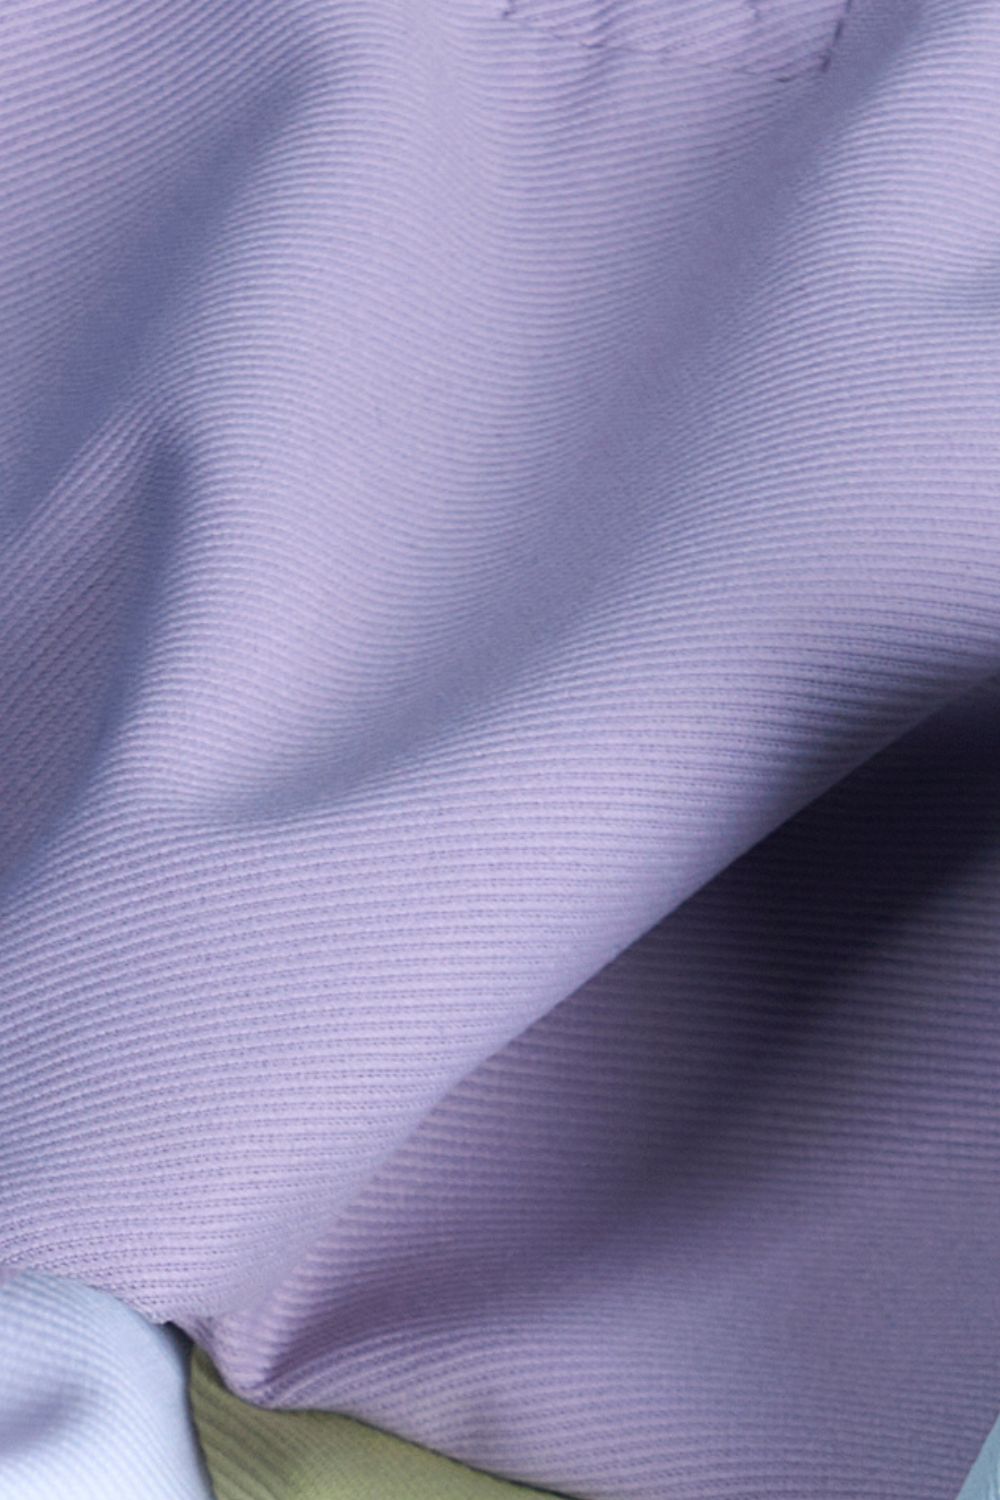 Mauve colored, zipped Polo T-shirts for men with collar and half sleeves, fabric close up.